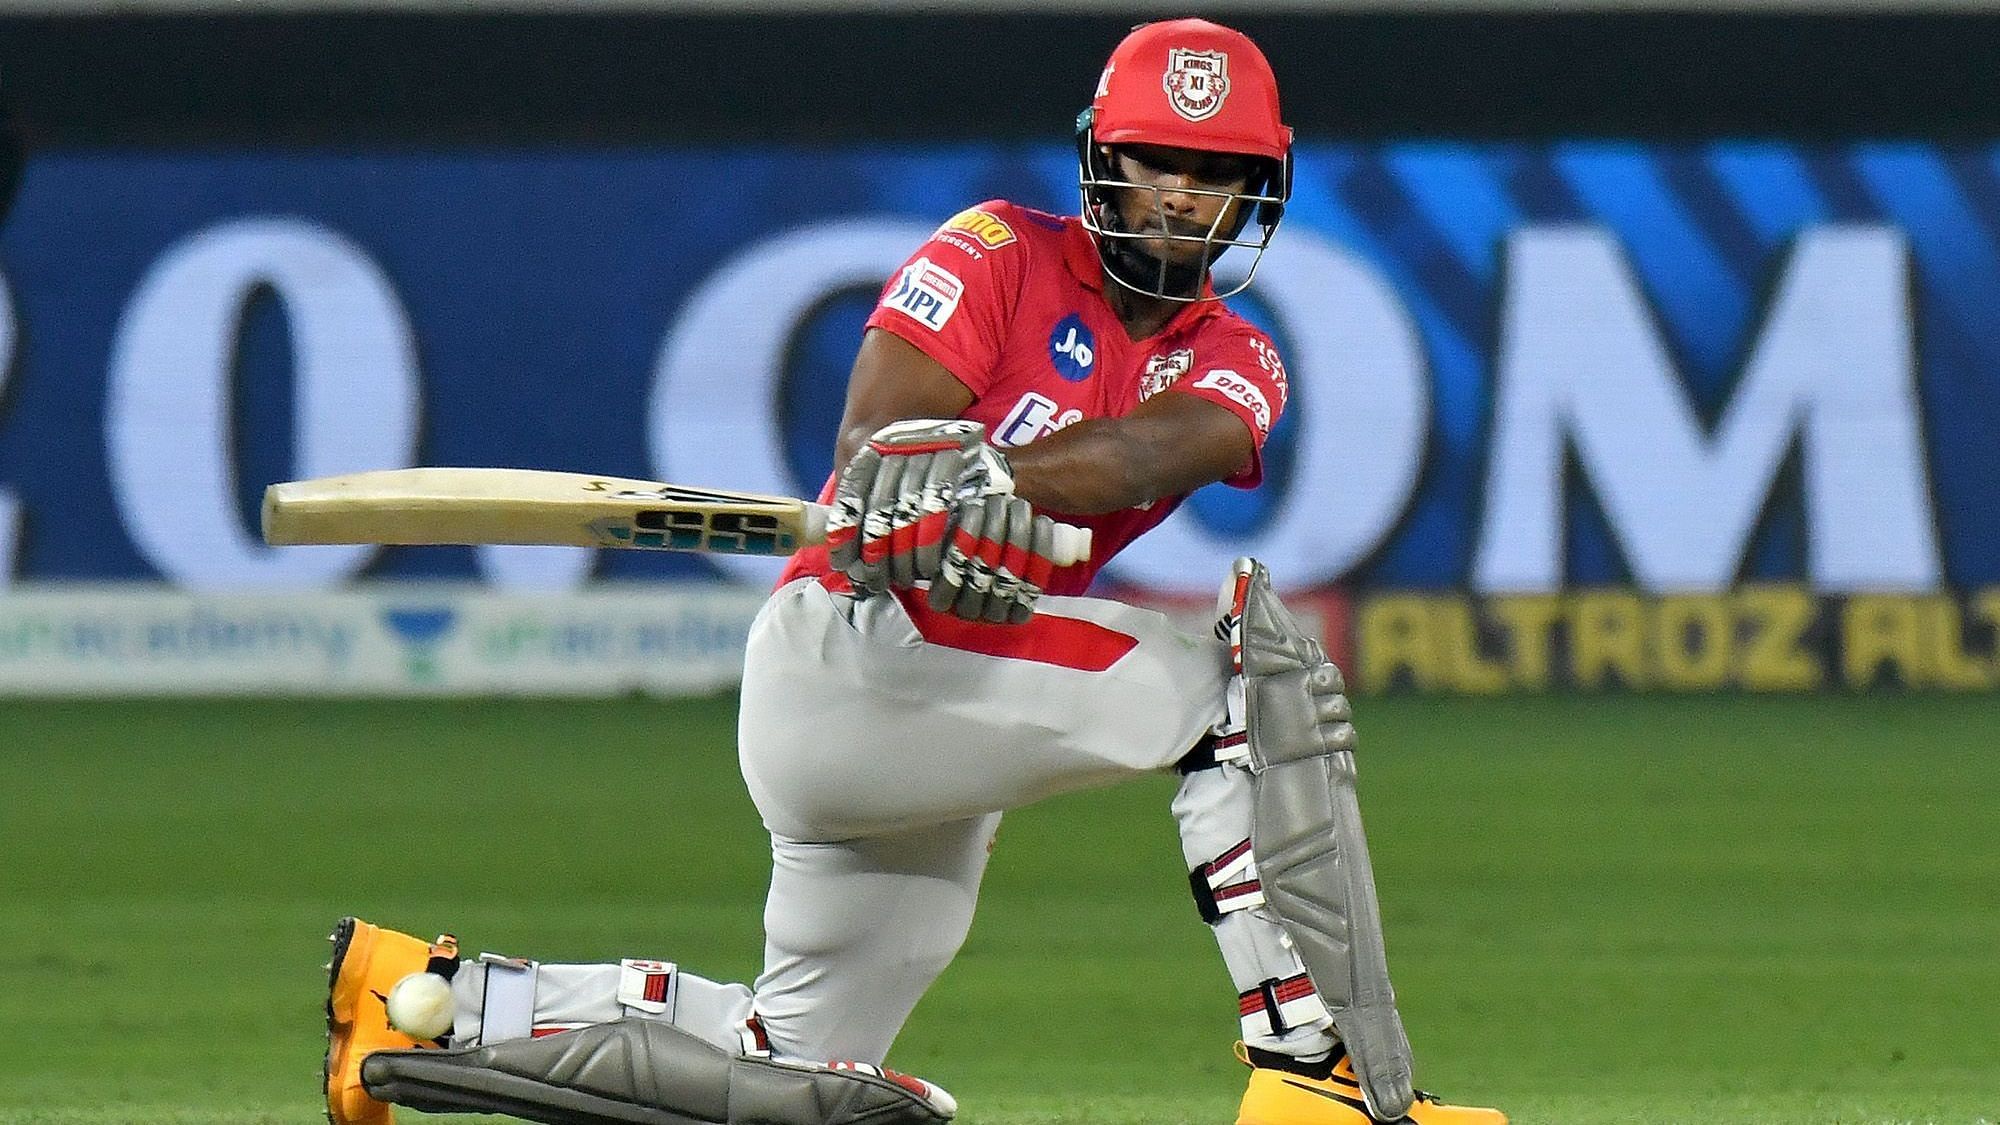 Kings XI Punjab batsman Nicholas Pooran smashed 77 runs off 37 balls but didn’t have any support from the other end